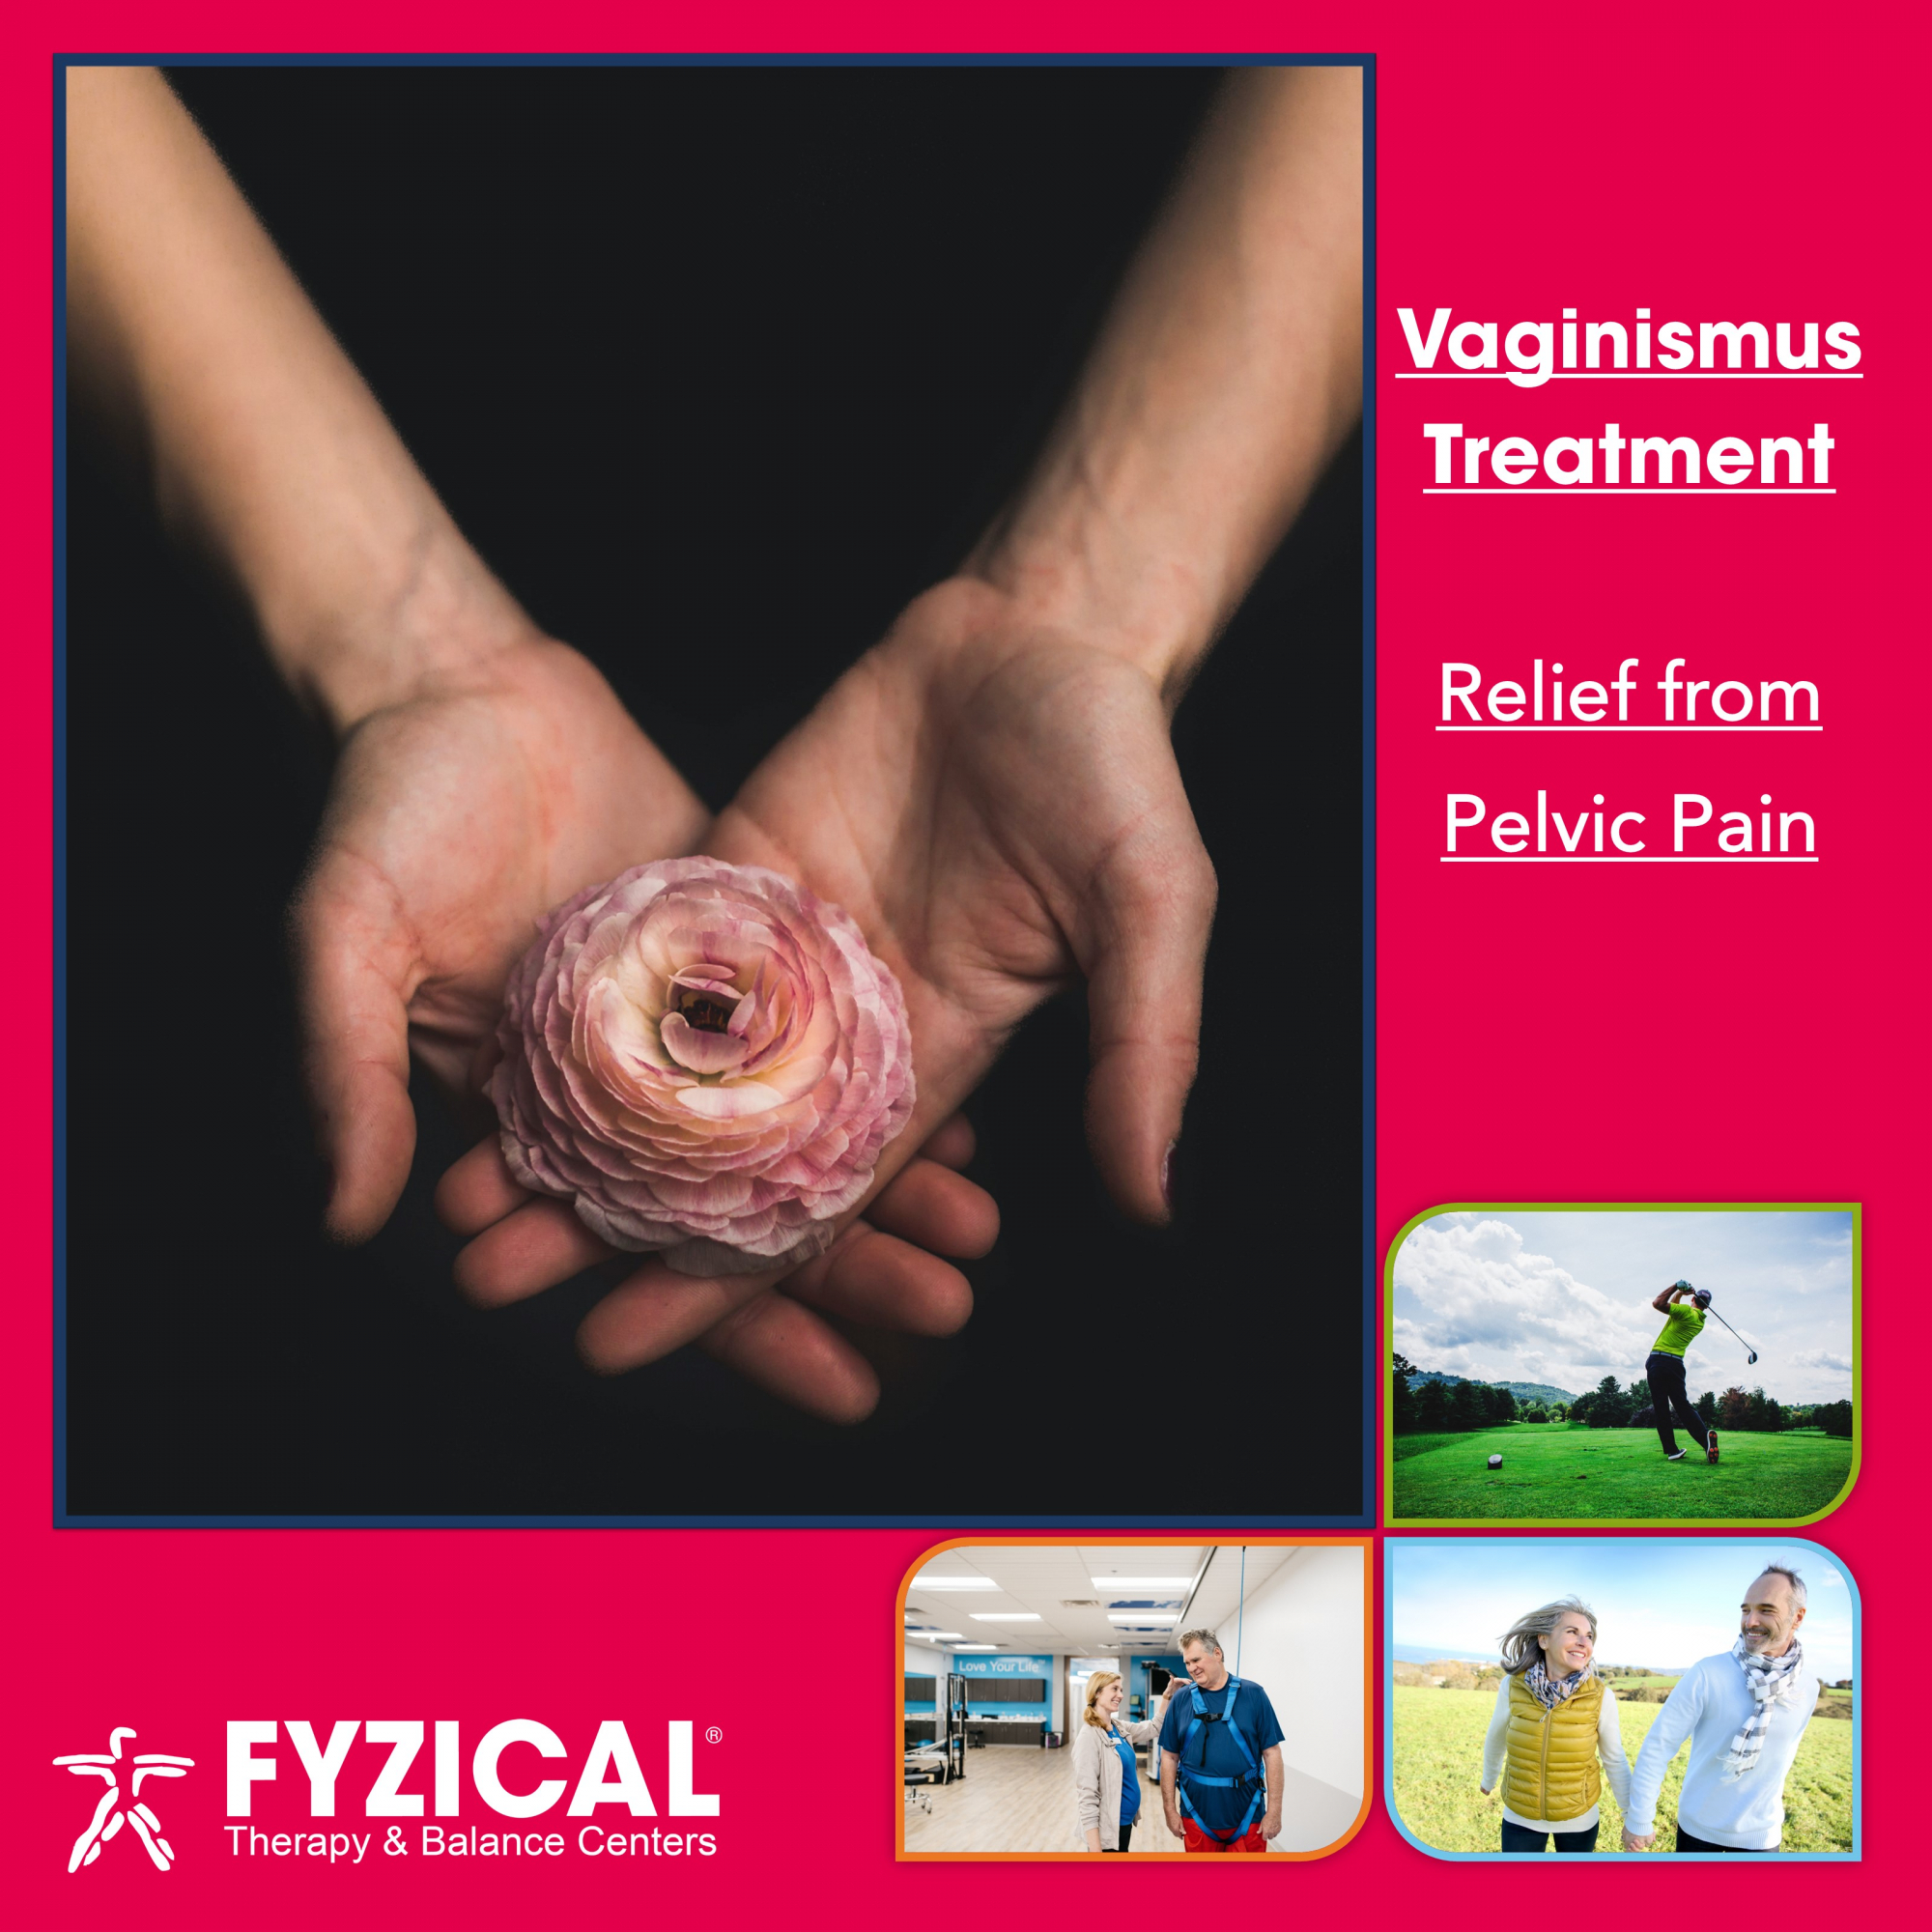 Womens Health Physical Therapy for Vaginismus Oklahoma City, OK with FYZICAL photo